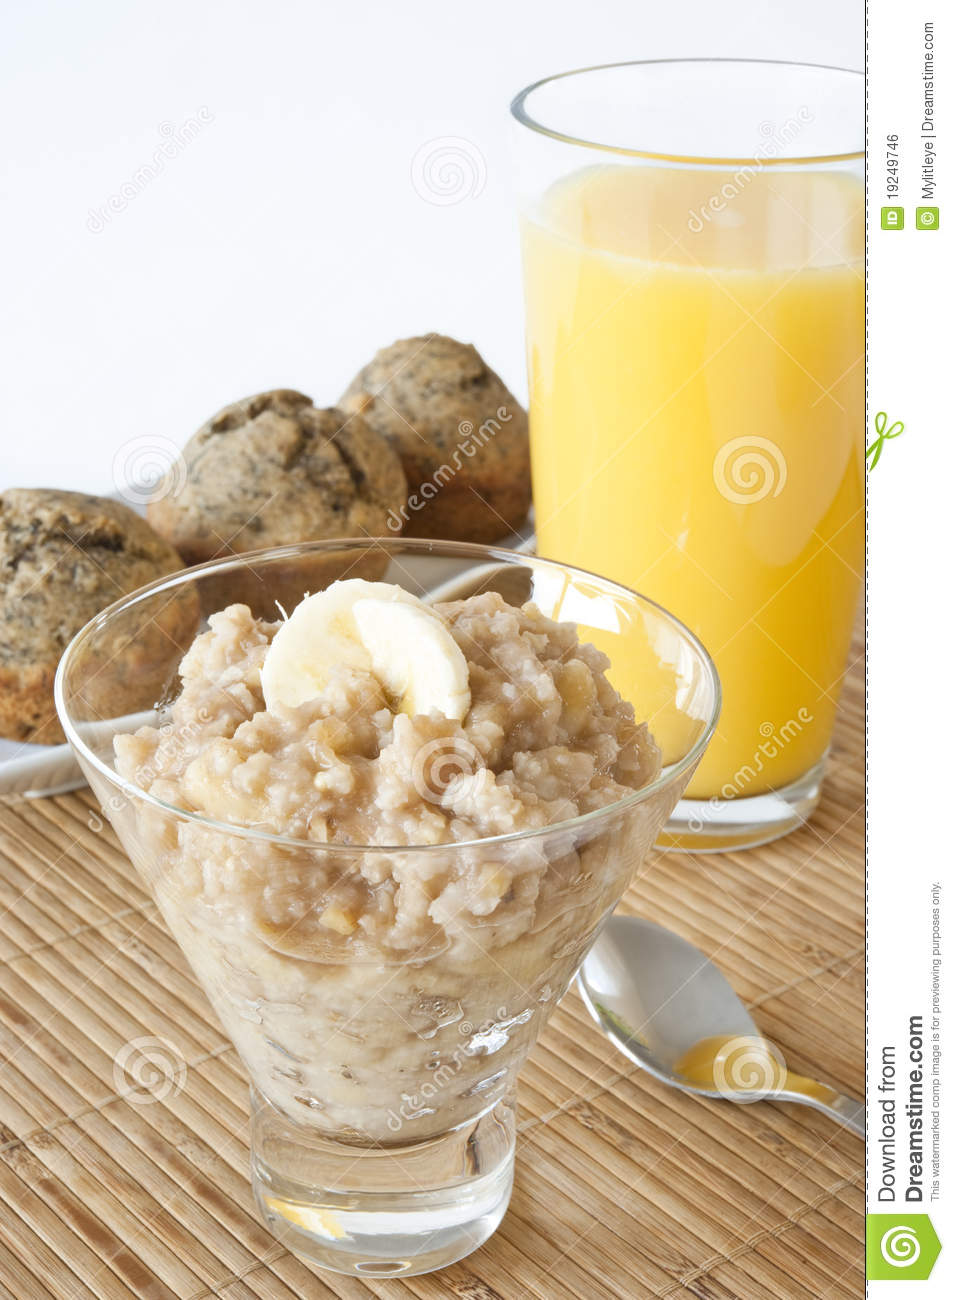 Dish Of Millet Banana Pudding With Banana Muffins And Orange Juice